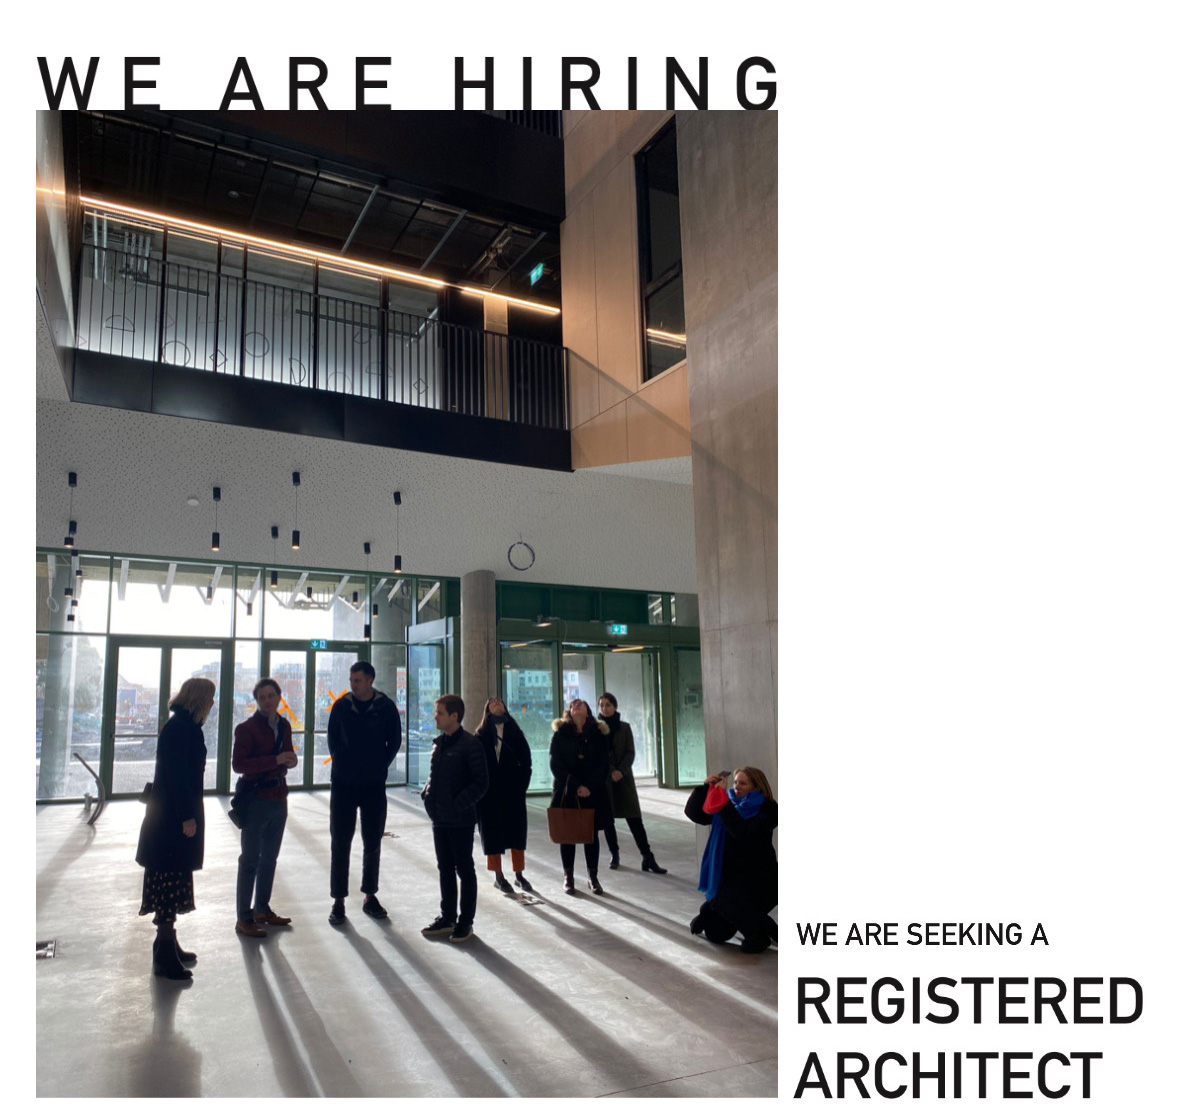 We're looking for a Registered Architect to join our team. Full details: tinyurl.com/ywyy4nwc #jobfairy